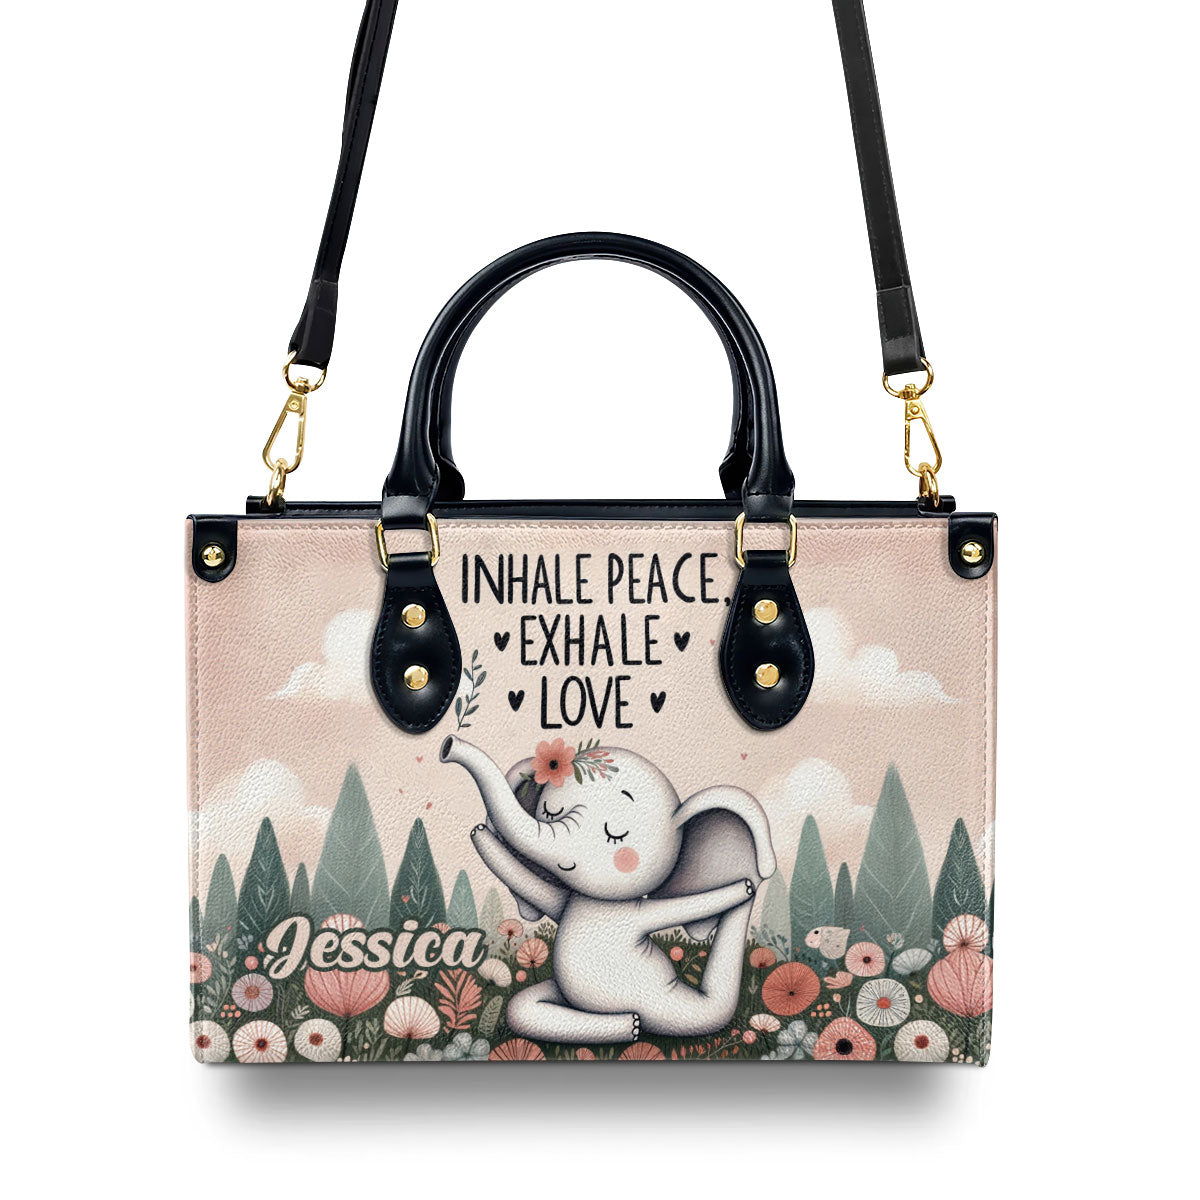 Inhale Peace, Exhale Love - Personalized Leather Handbag MS838